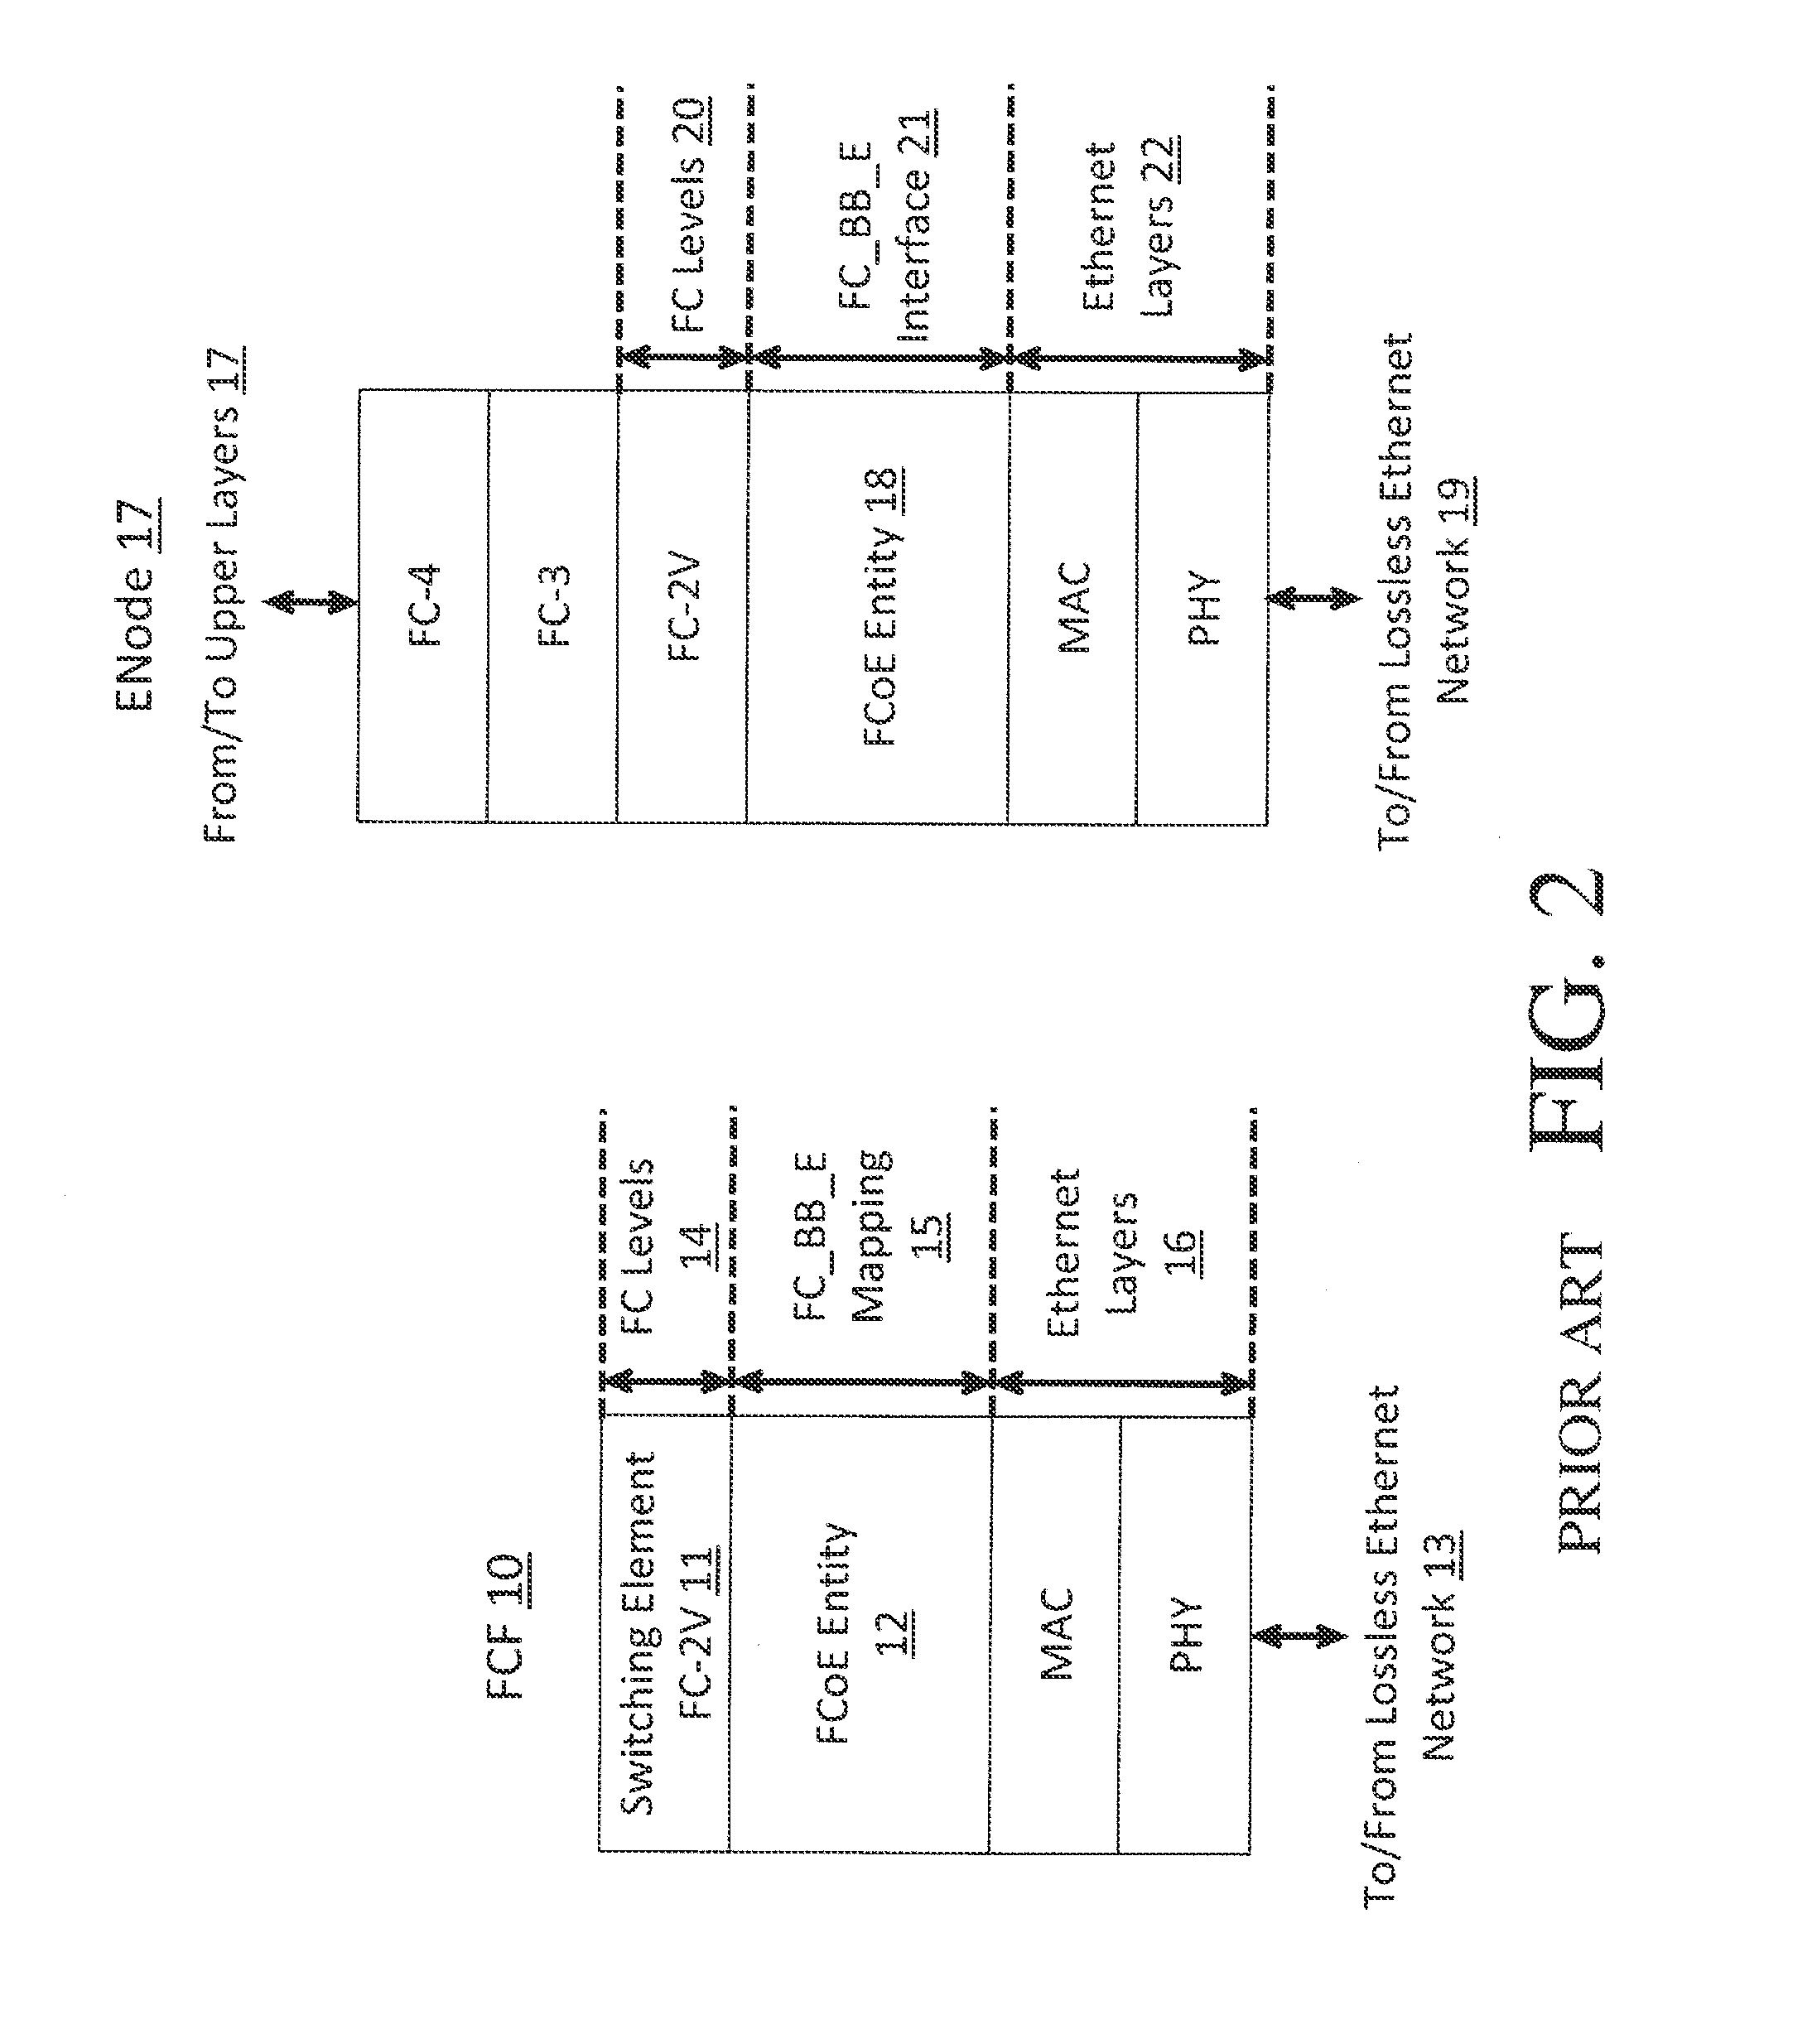 Methods, systems and apparatus for the interconnection of fibre channel over ethernet devices using a fibre channel over ethernet interconnection apparatus controller